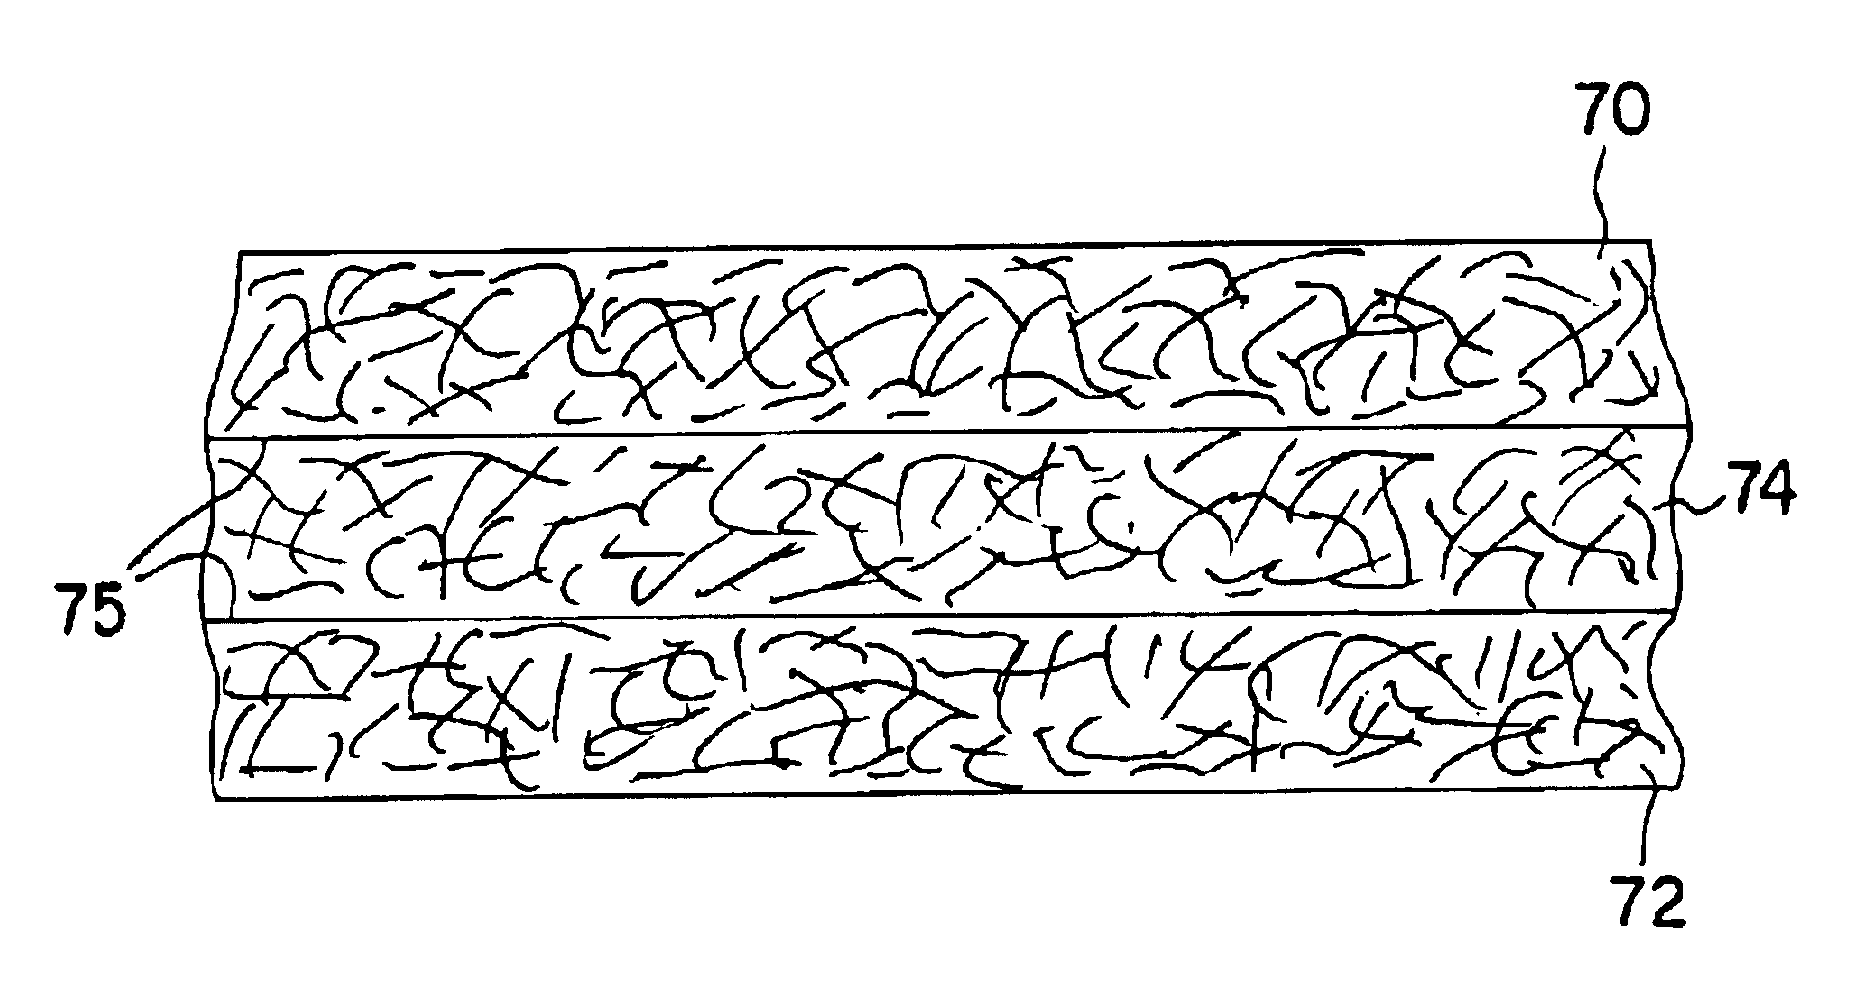 Method of forming composite absorbent members